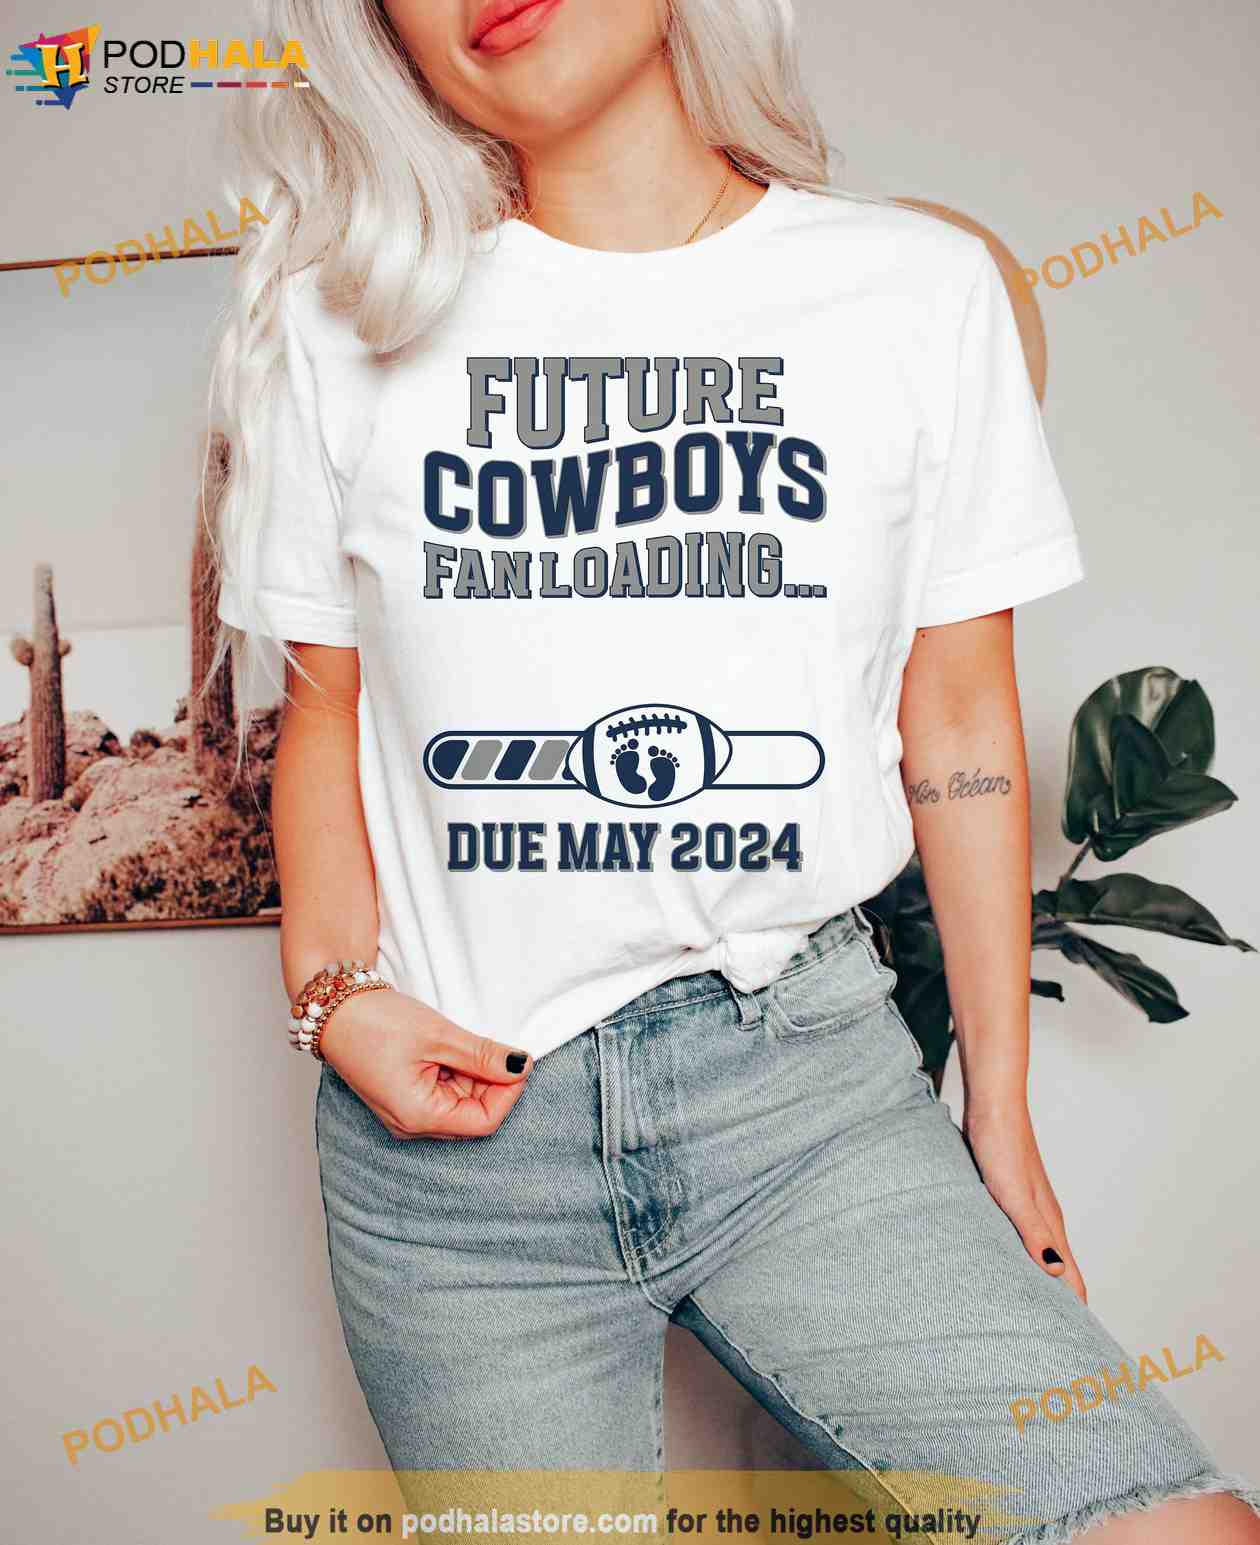 dallas cowboys gifts for him near me